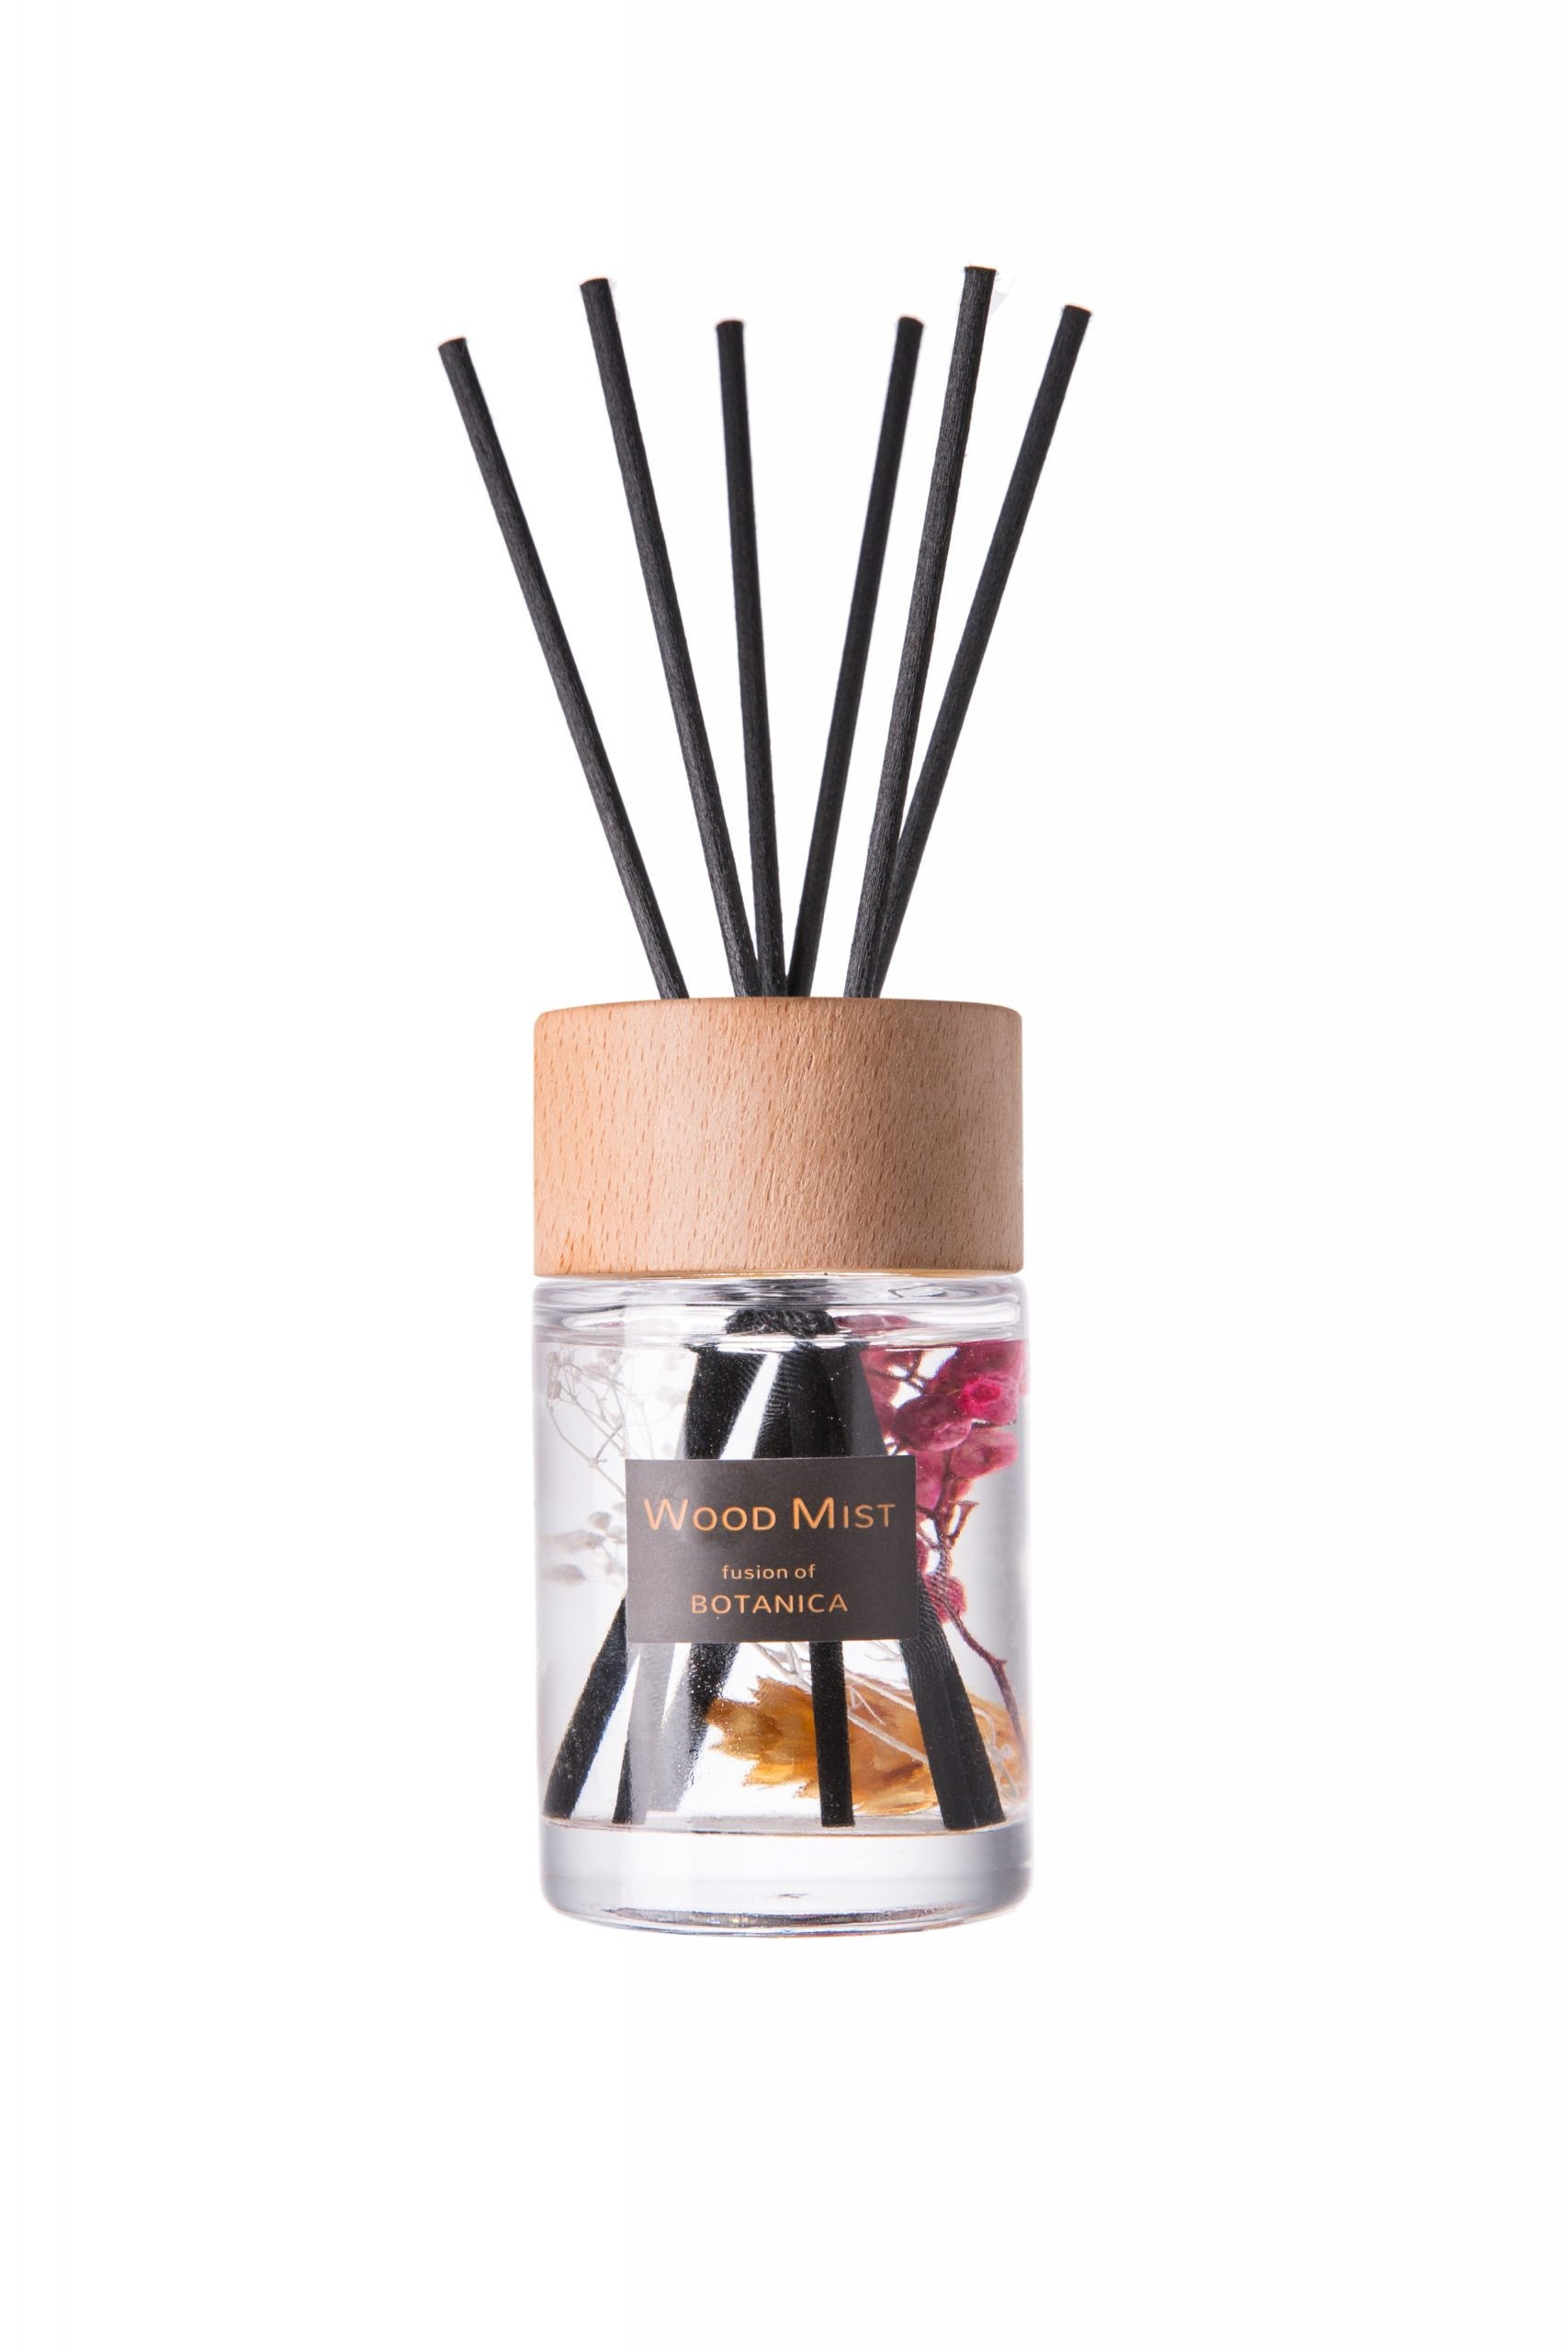 Red Berry Wood Mist Mini Diffuser - Botanica Fragrance-MyDreamVibe.Co